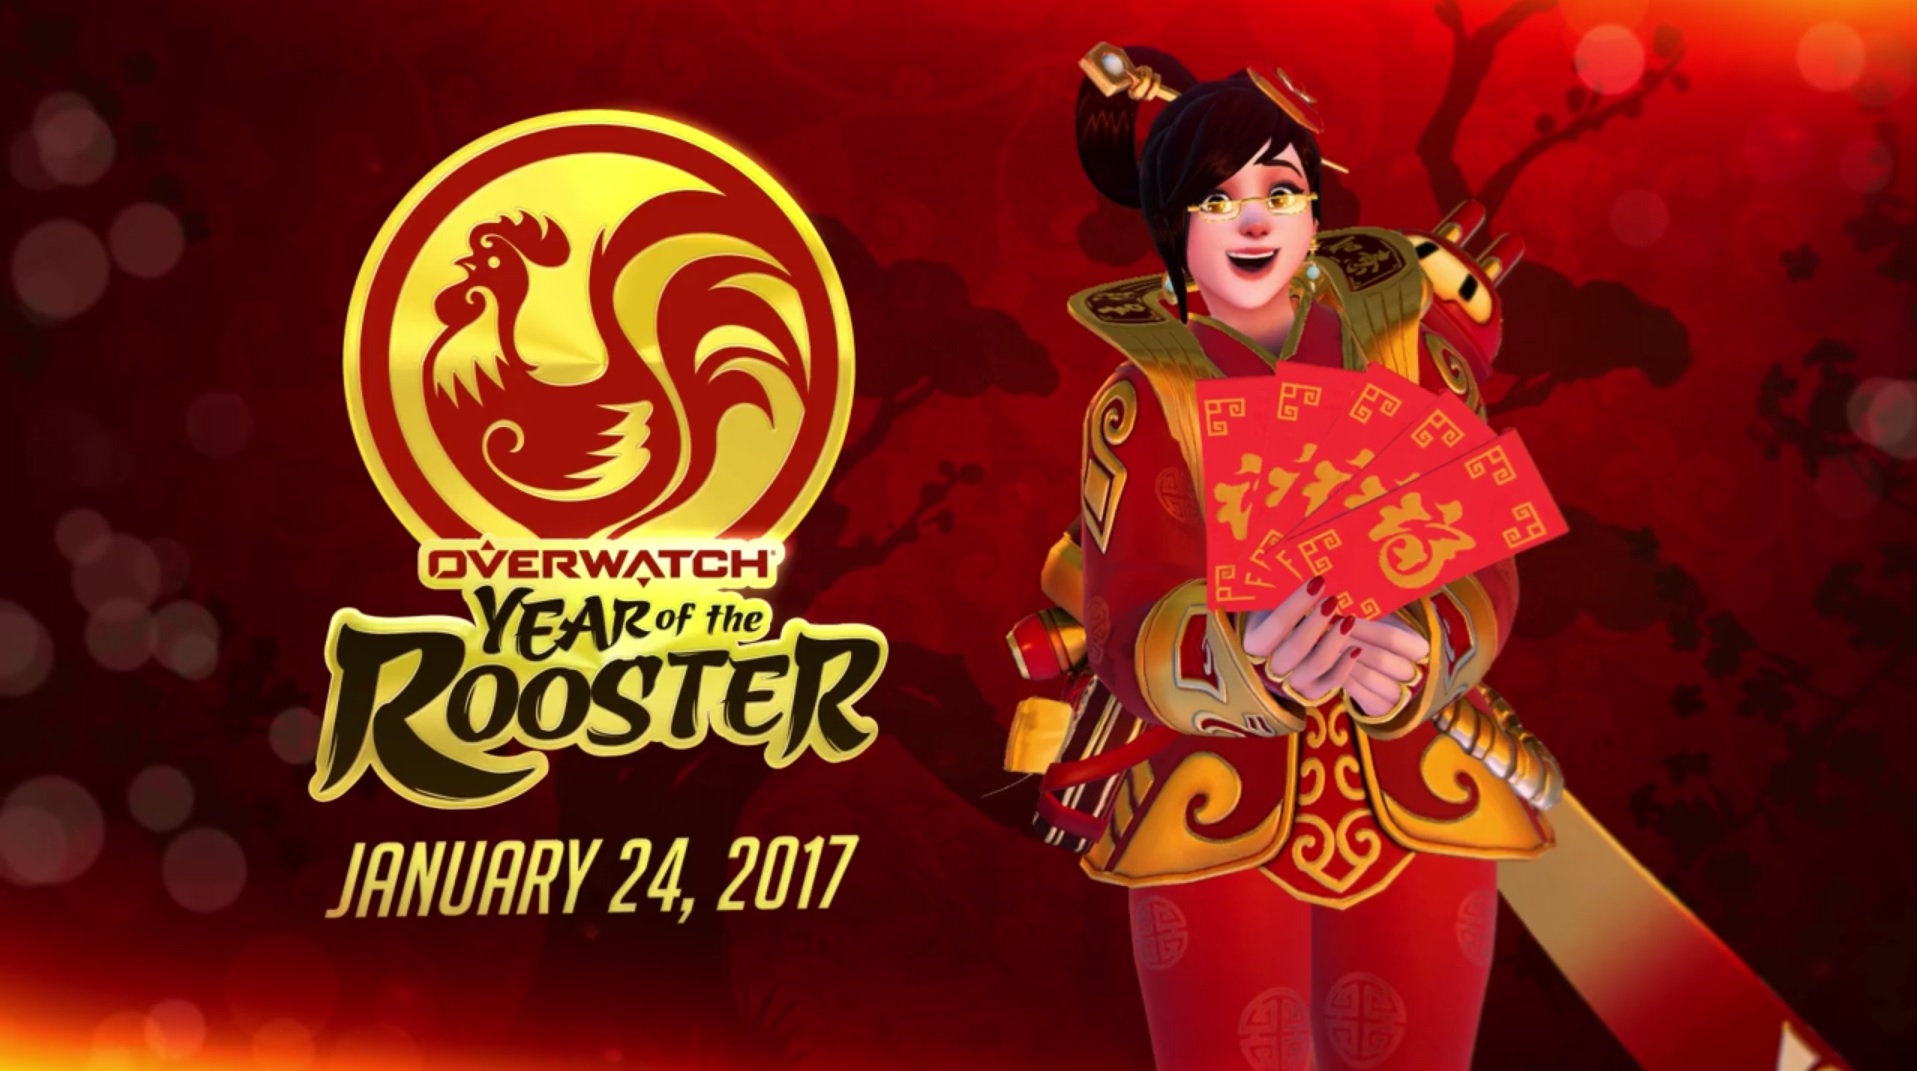 Celebrate the Year of the Rooster with Overwatch